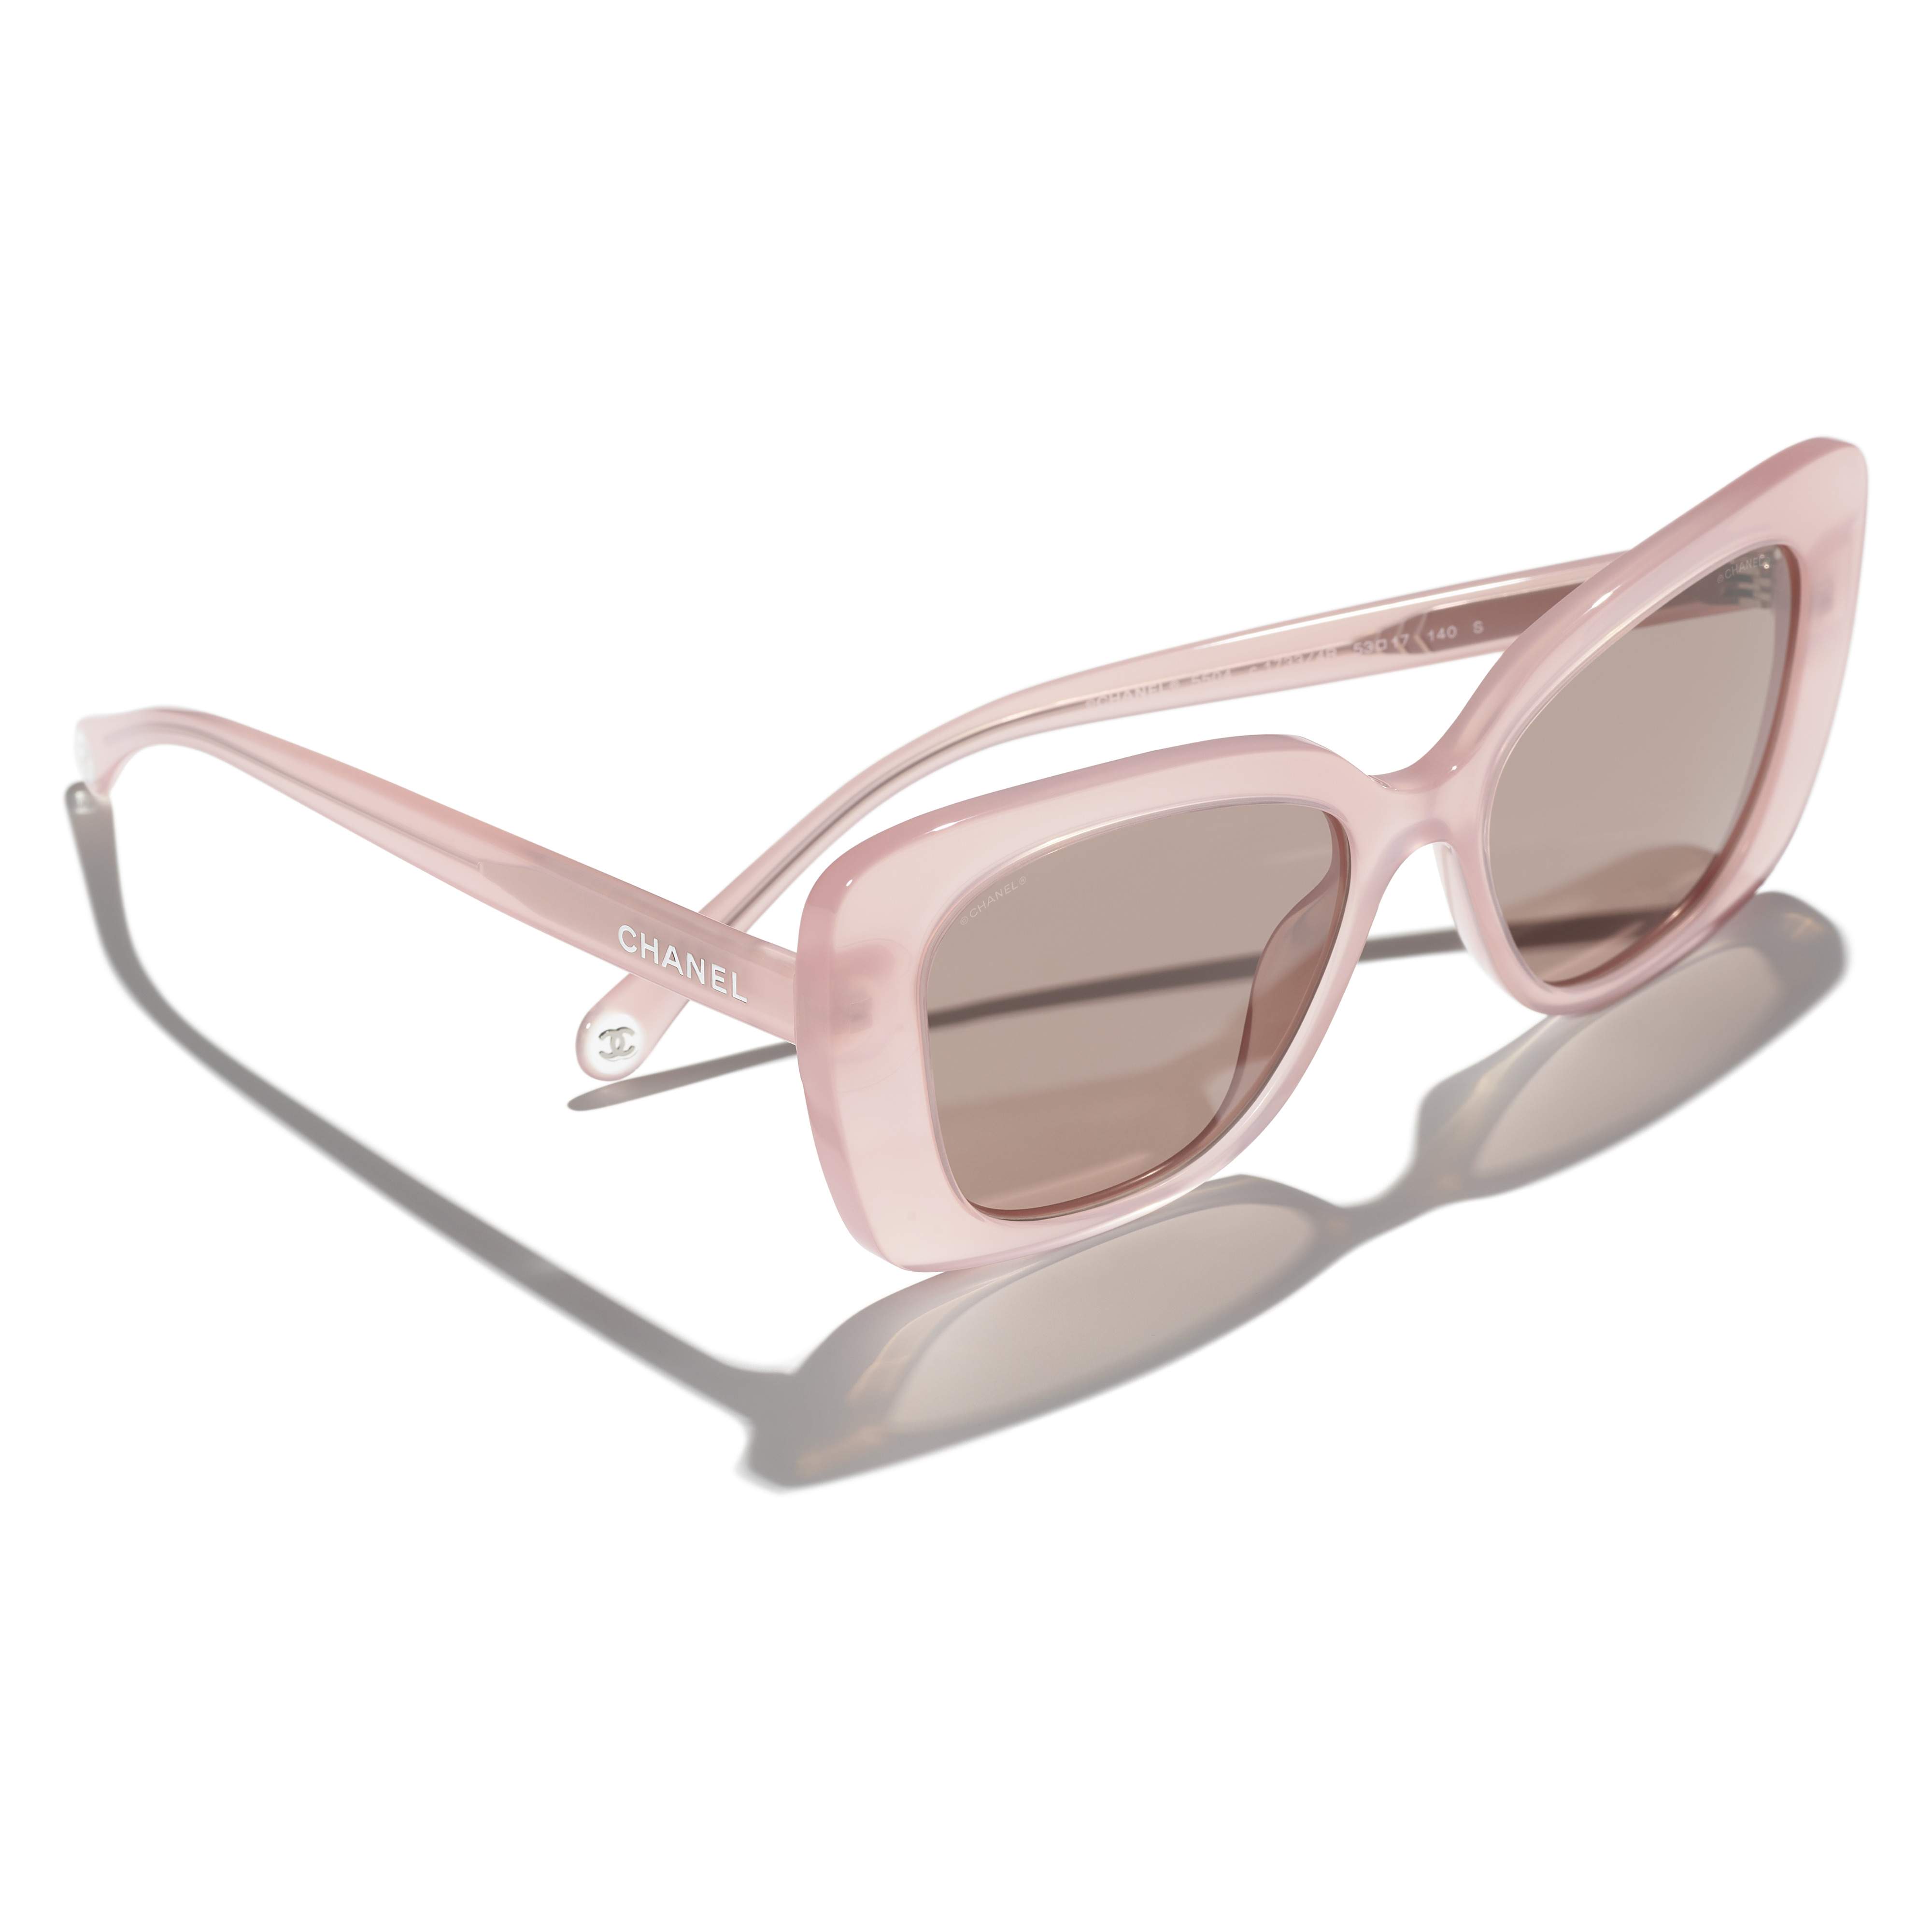 Sunglasses CHANEL CH5504 17334R 53-17 Pink in stock | Price 216,67 ...